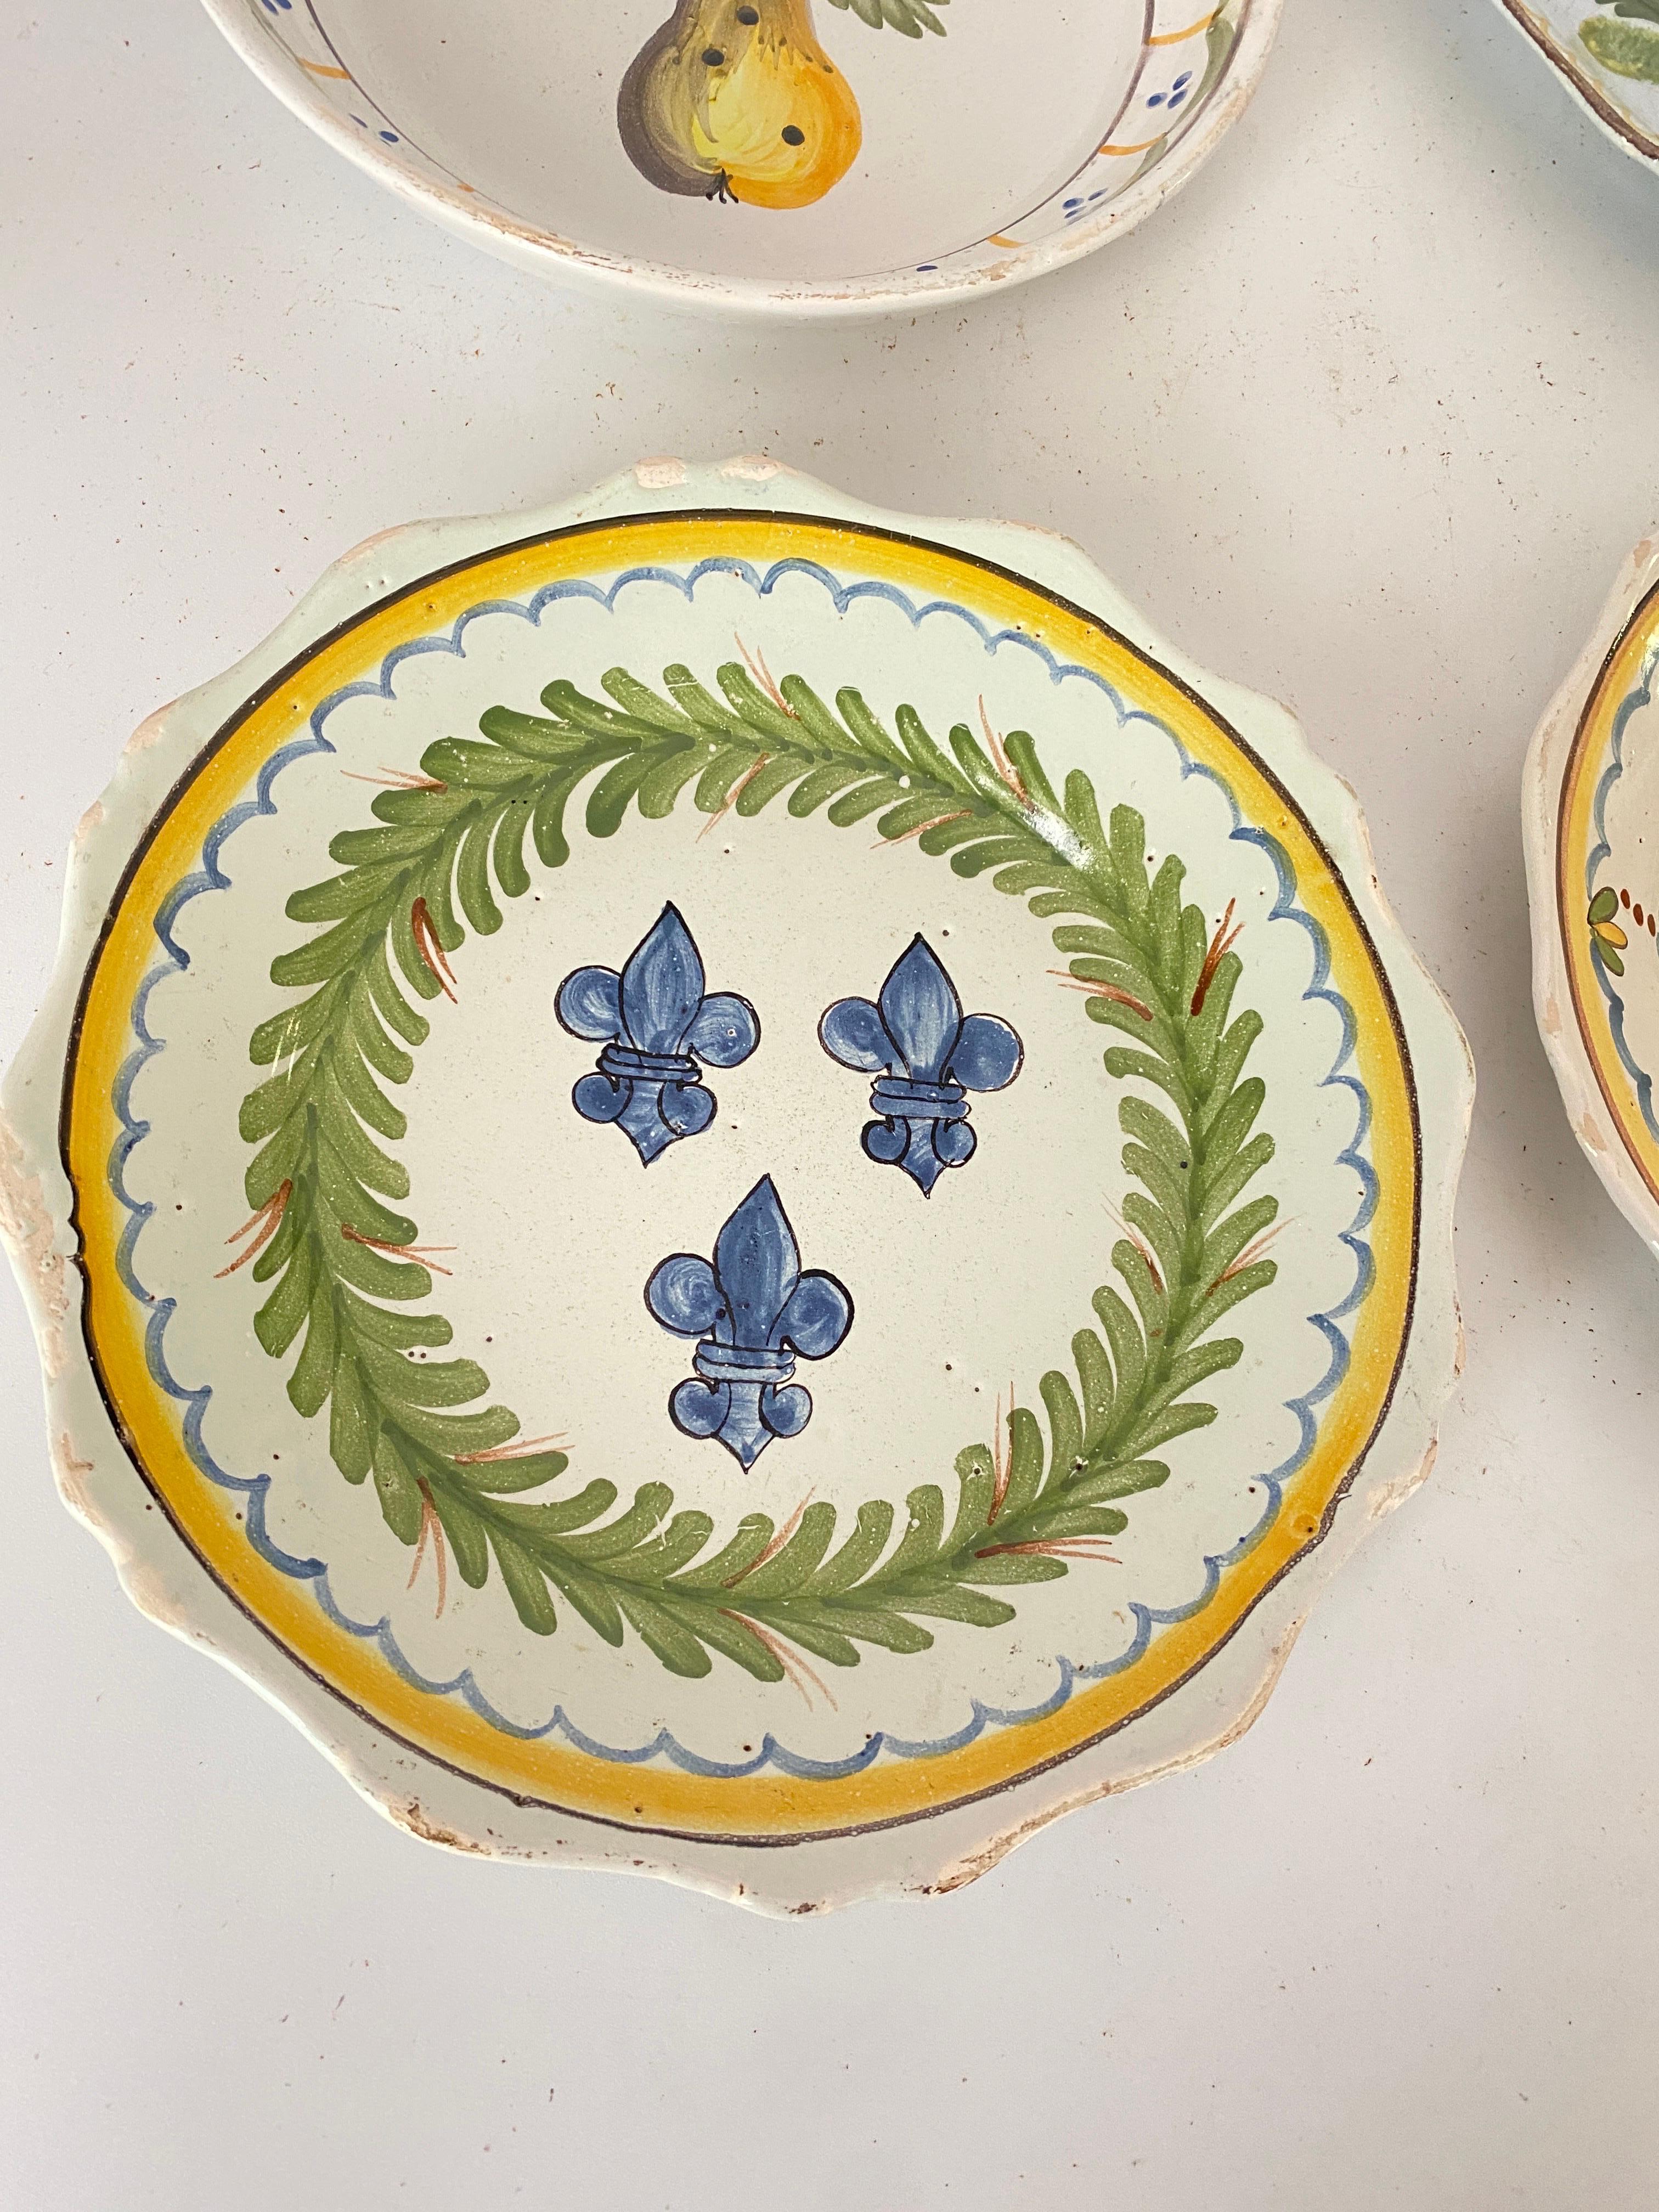 French Faience Plates 19th Century Pear..Decor Pattern Blue, Green Set of 4 For Sale 5